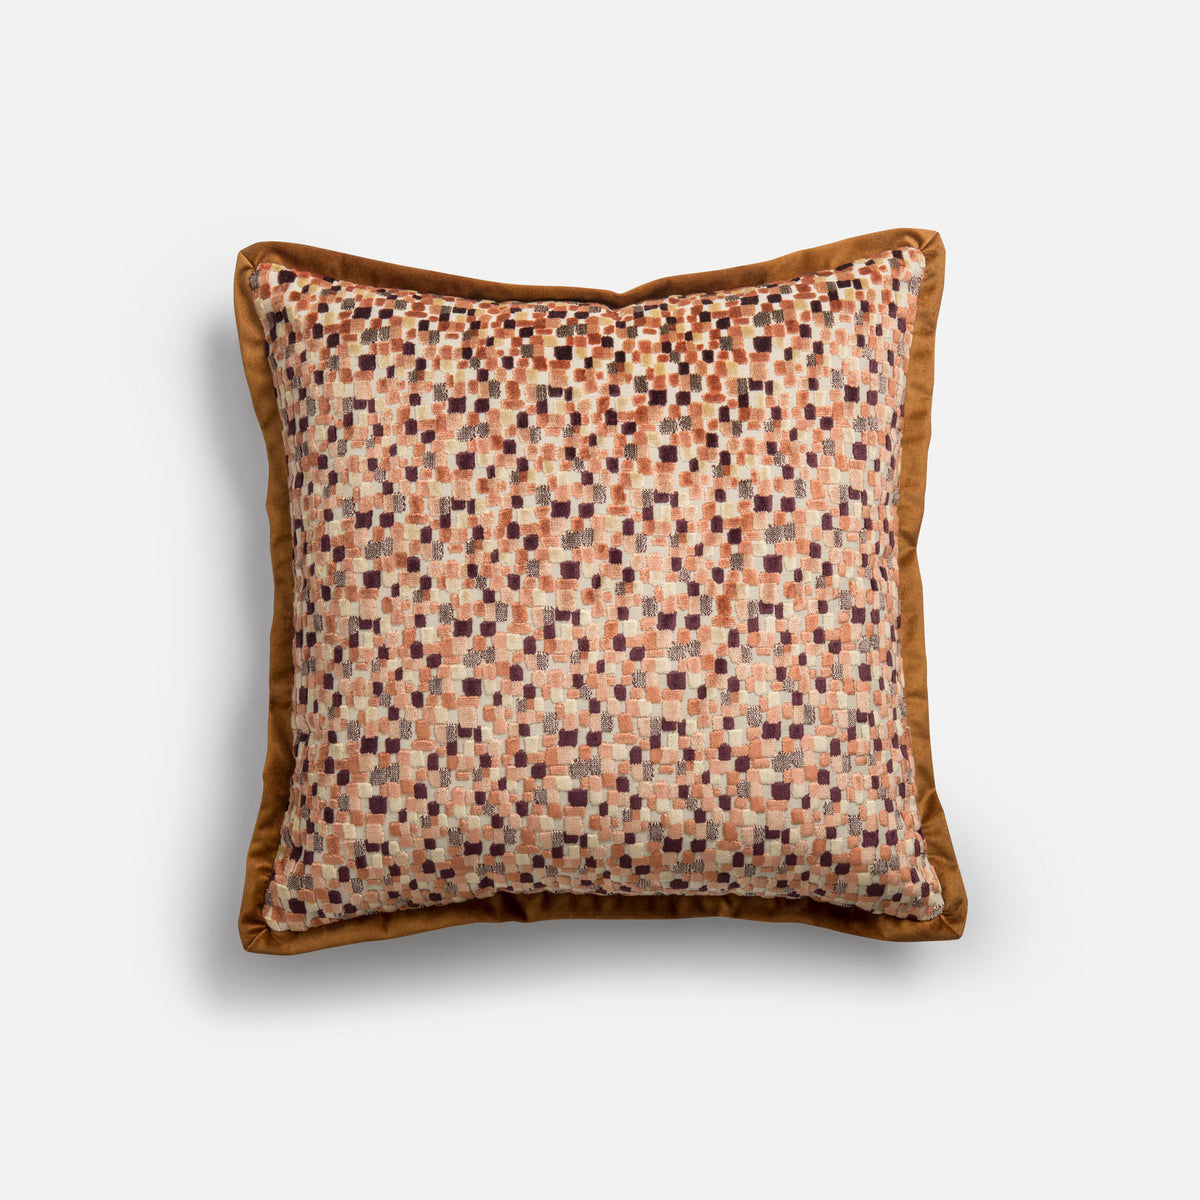 Marrakesch Cushion - The Finishing Store South Africa